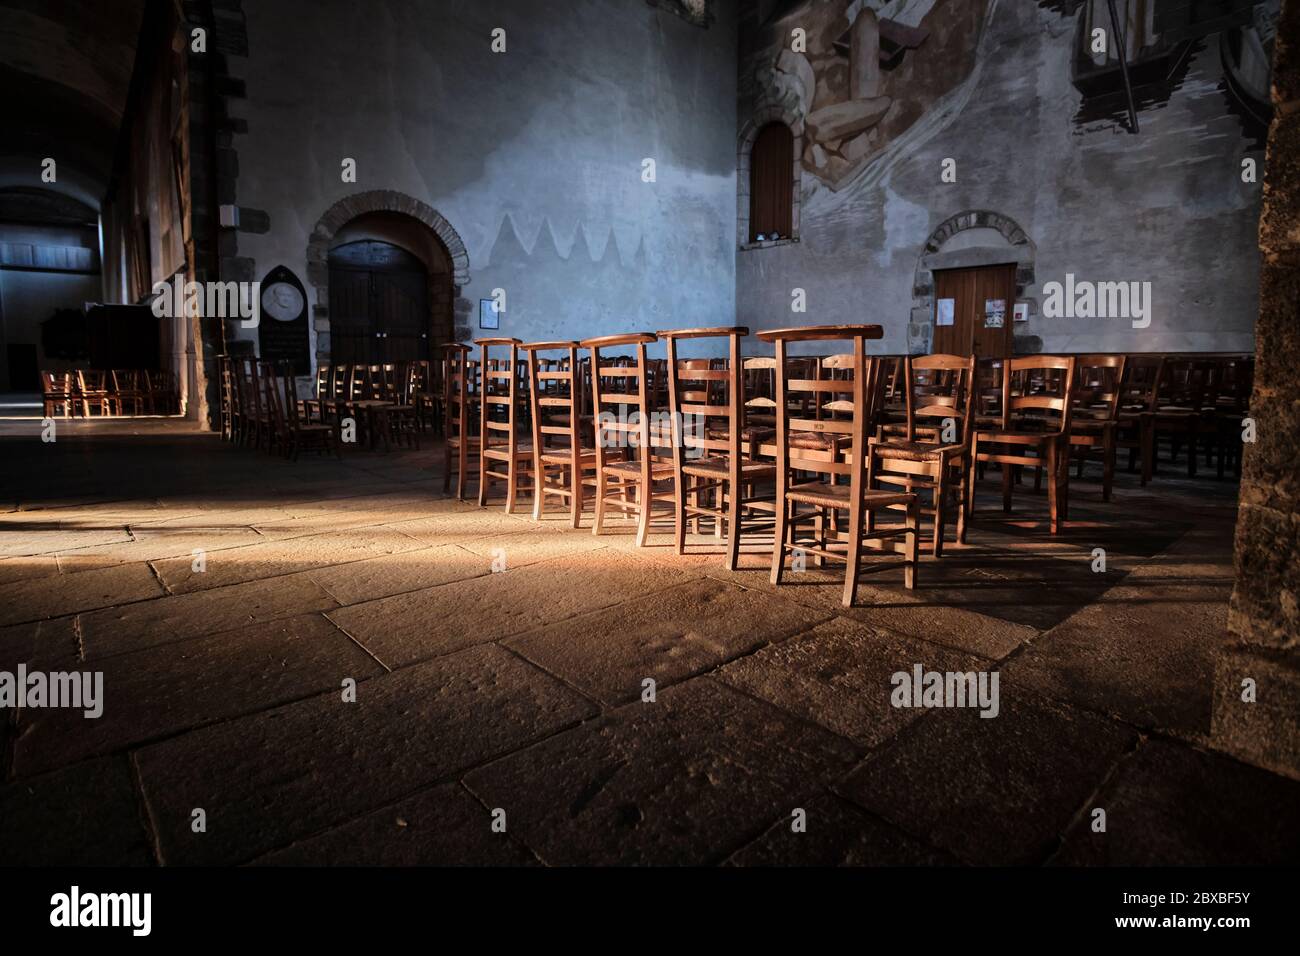 Wooden chairs and kneeling stools in the Transpet of the Church of St. Melaine with a stream of light illuminating the chairs and alcove Stock Photo